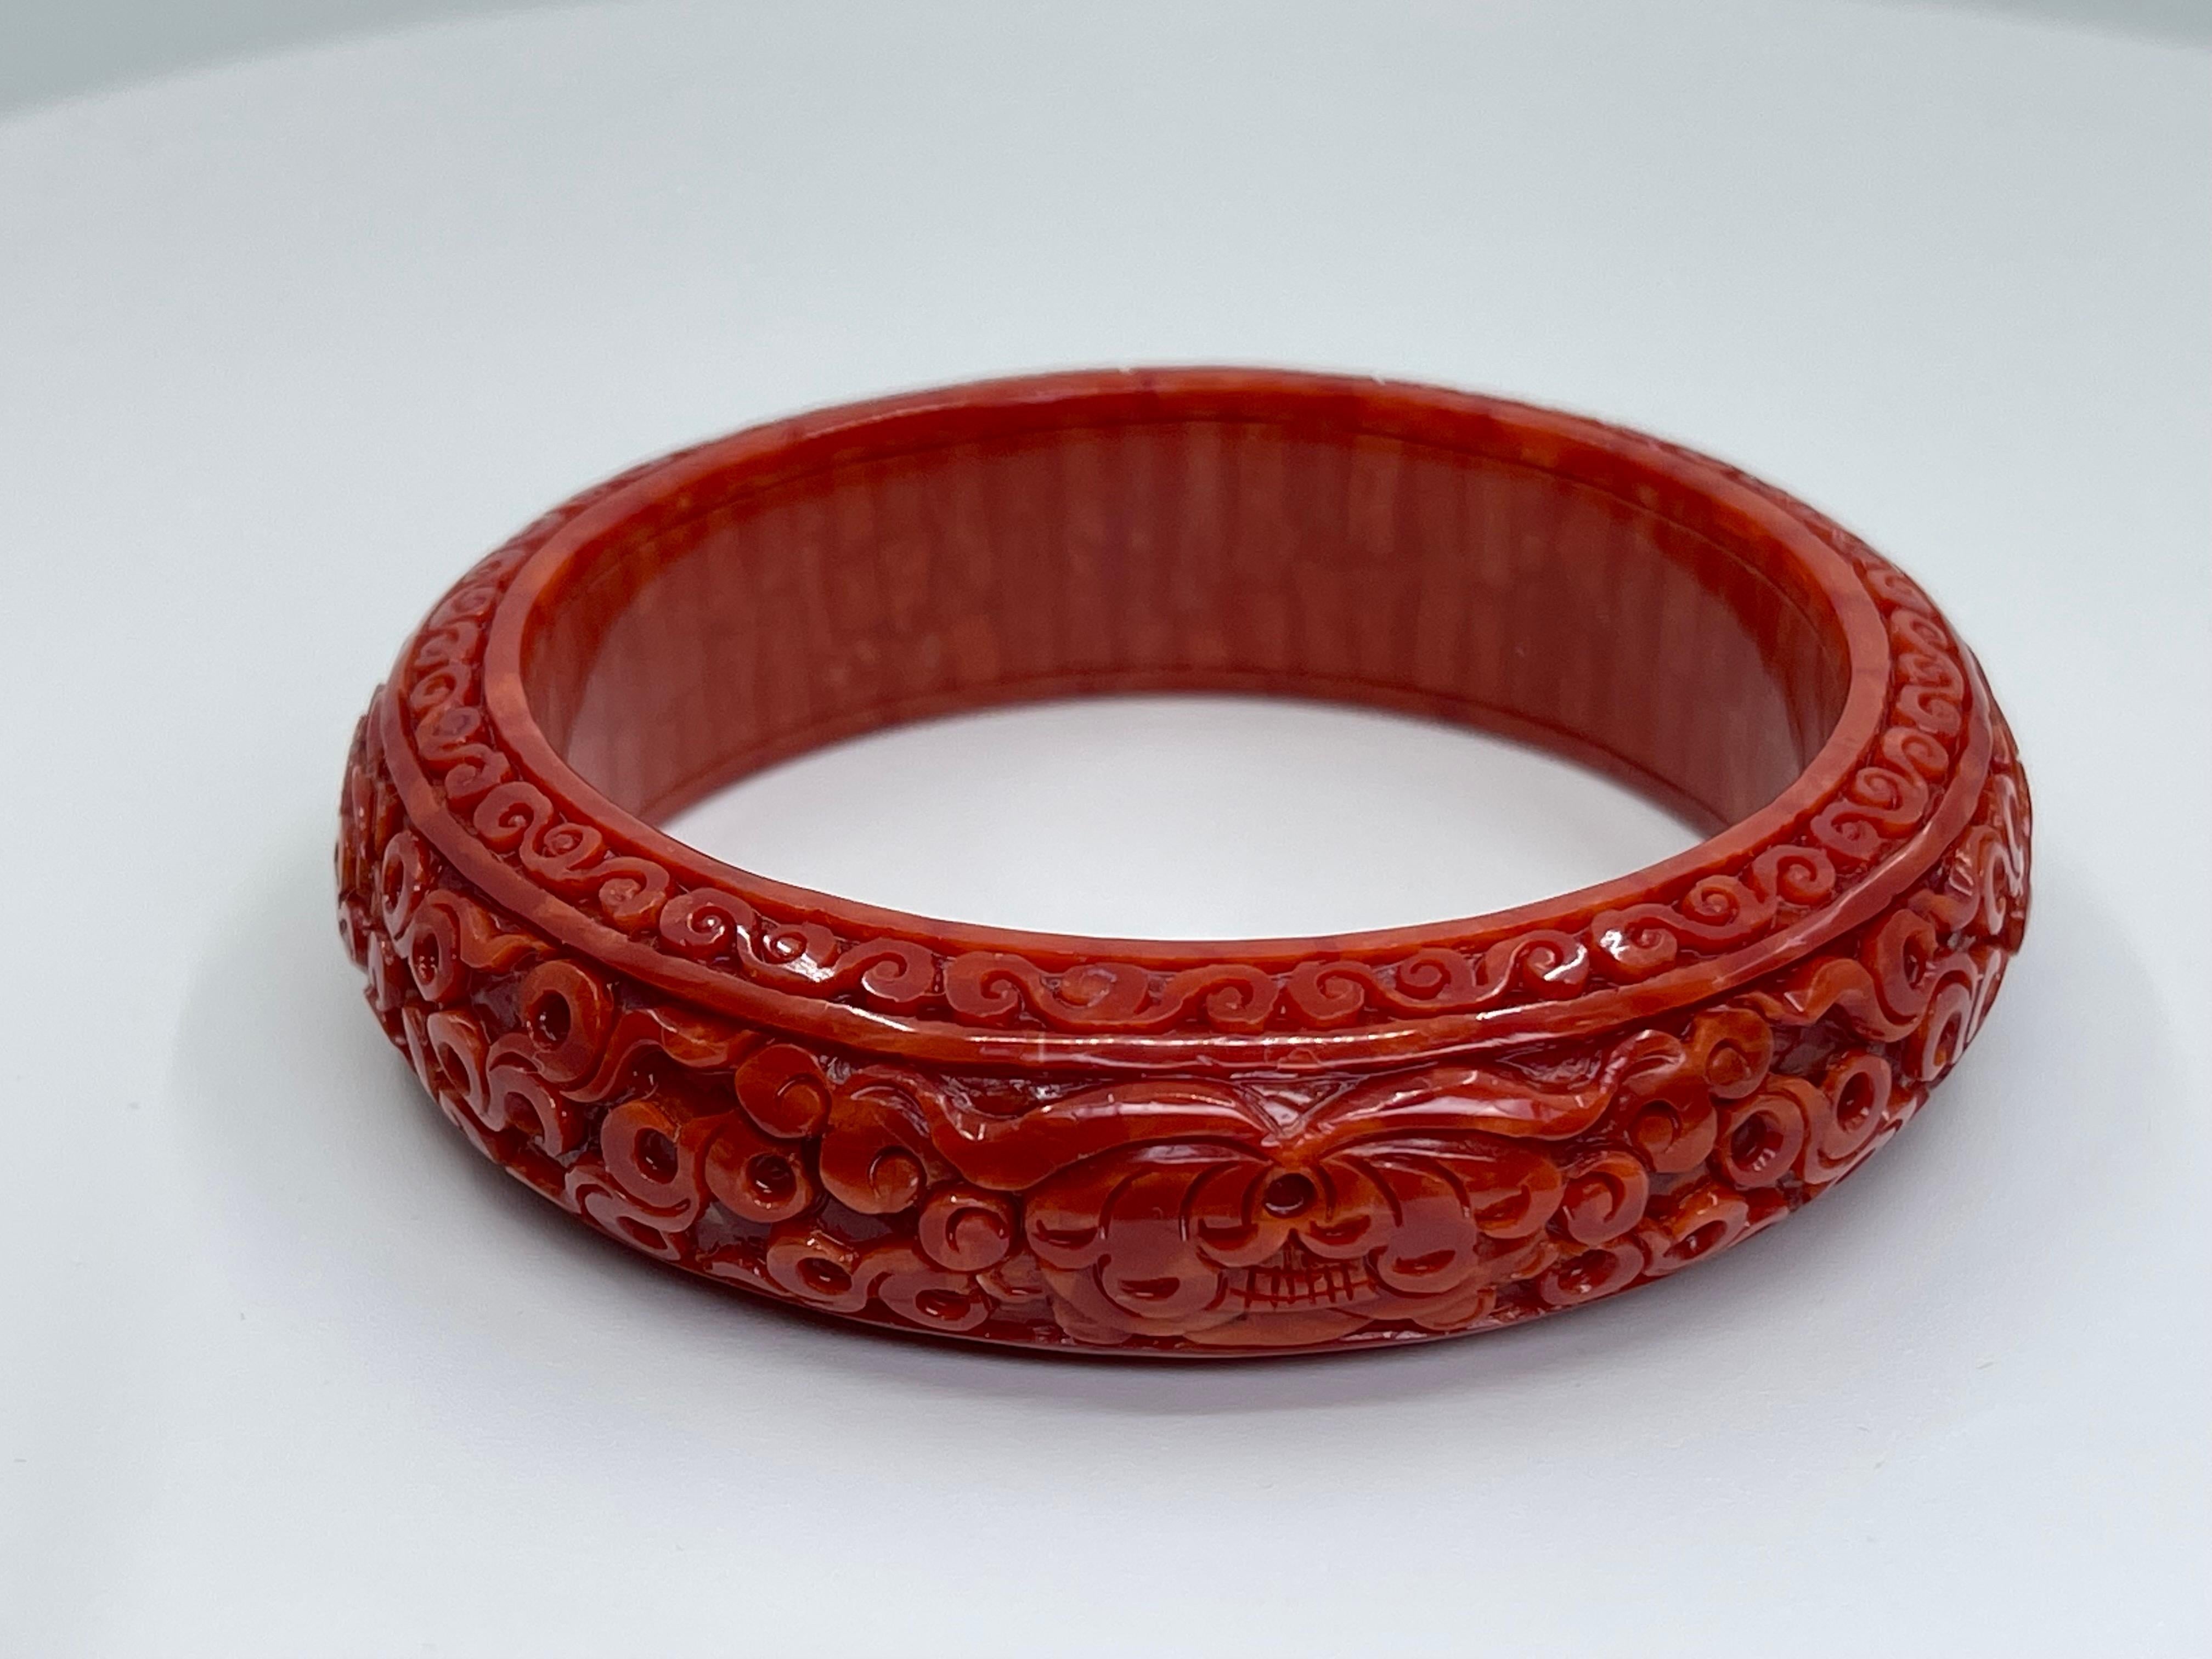 Rough Cut GIA Certified Natural Red Coral Bangle Bracelet, Exceptional Carving